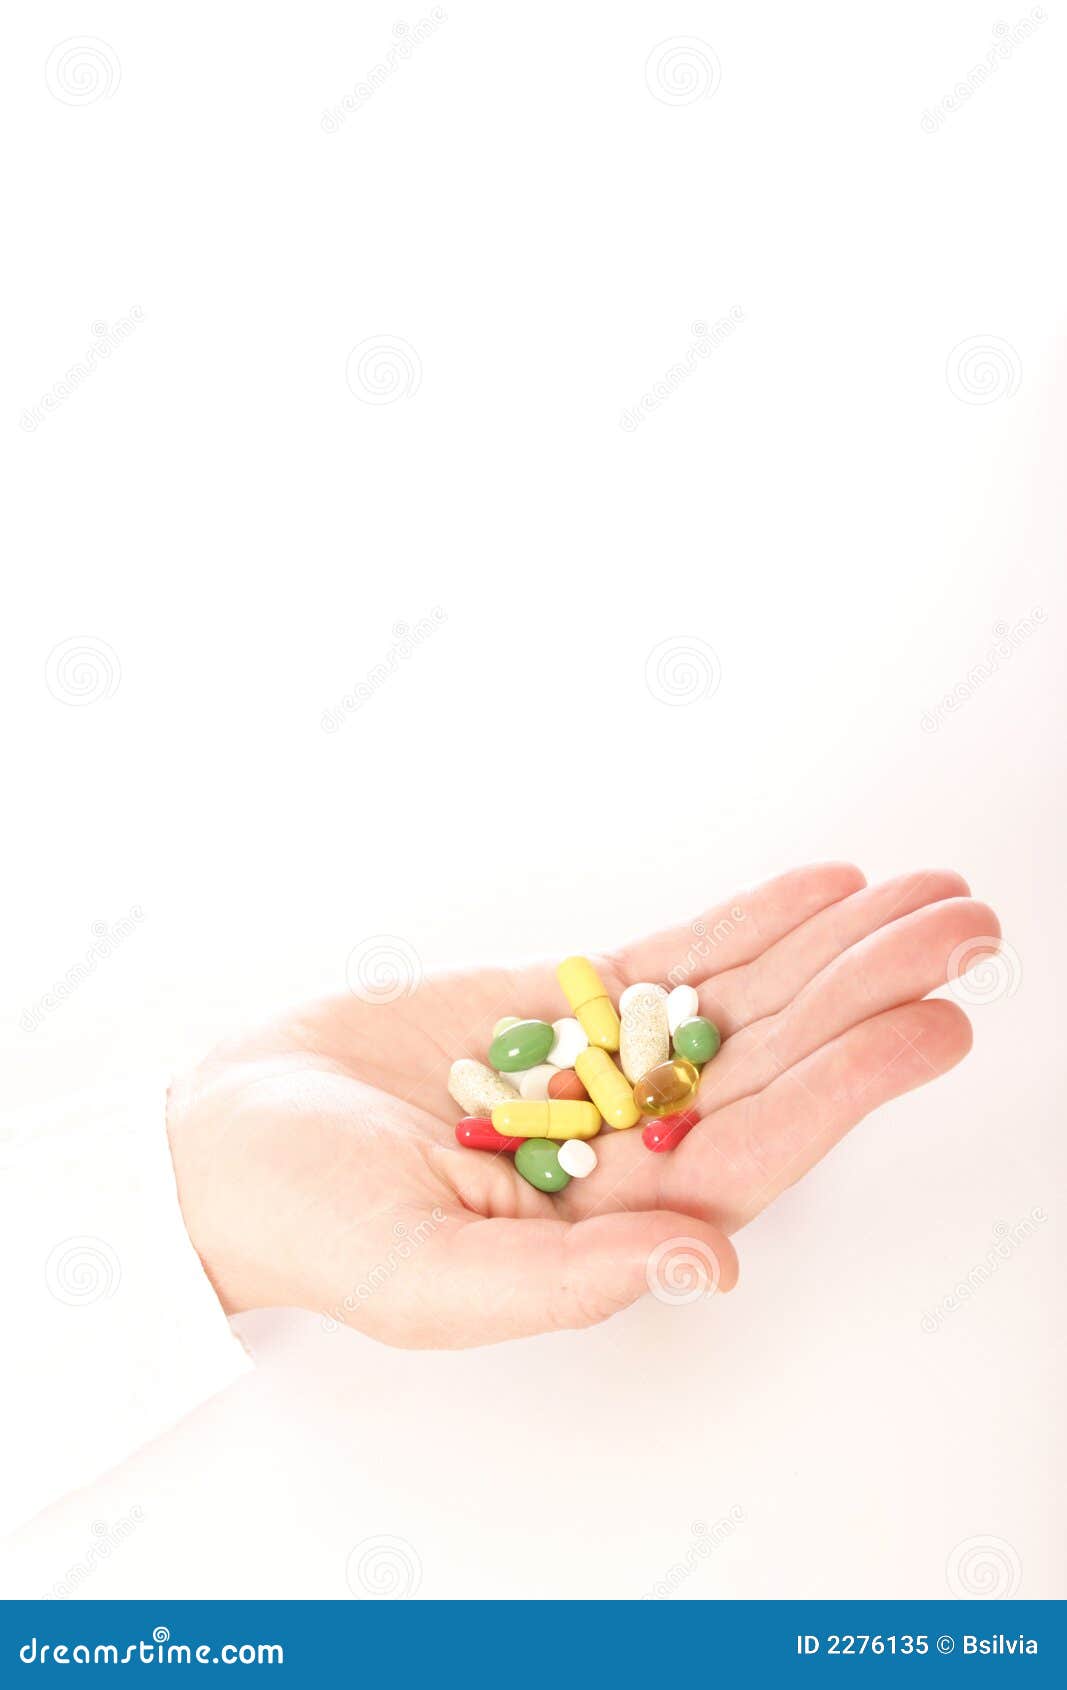 Woman with a hand full of pills